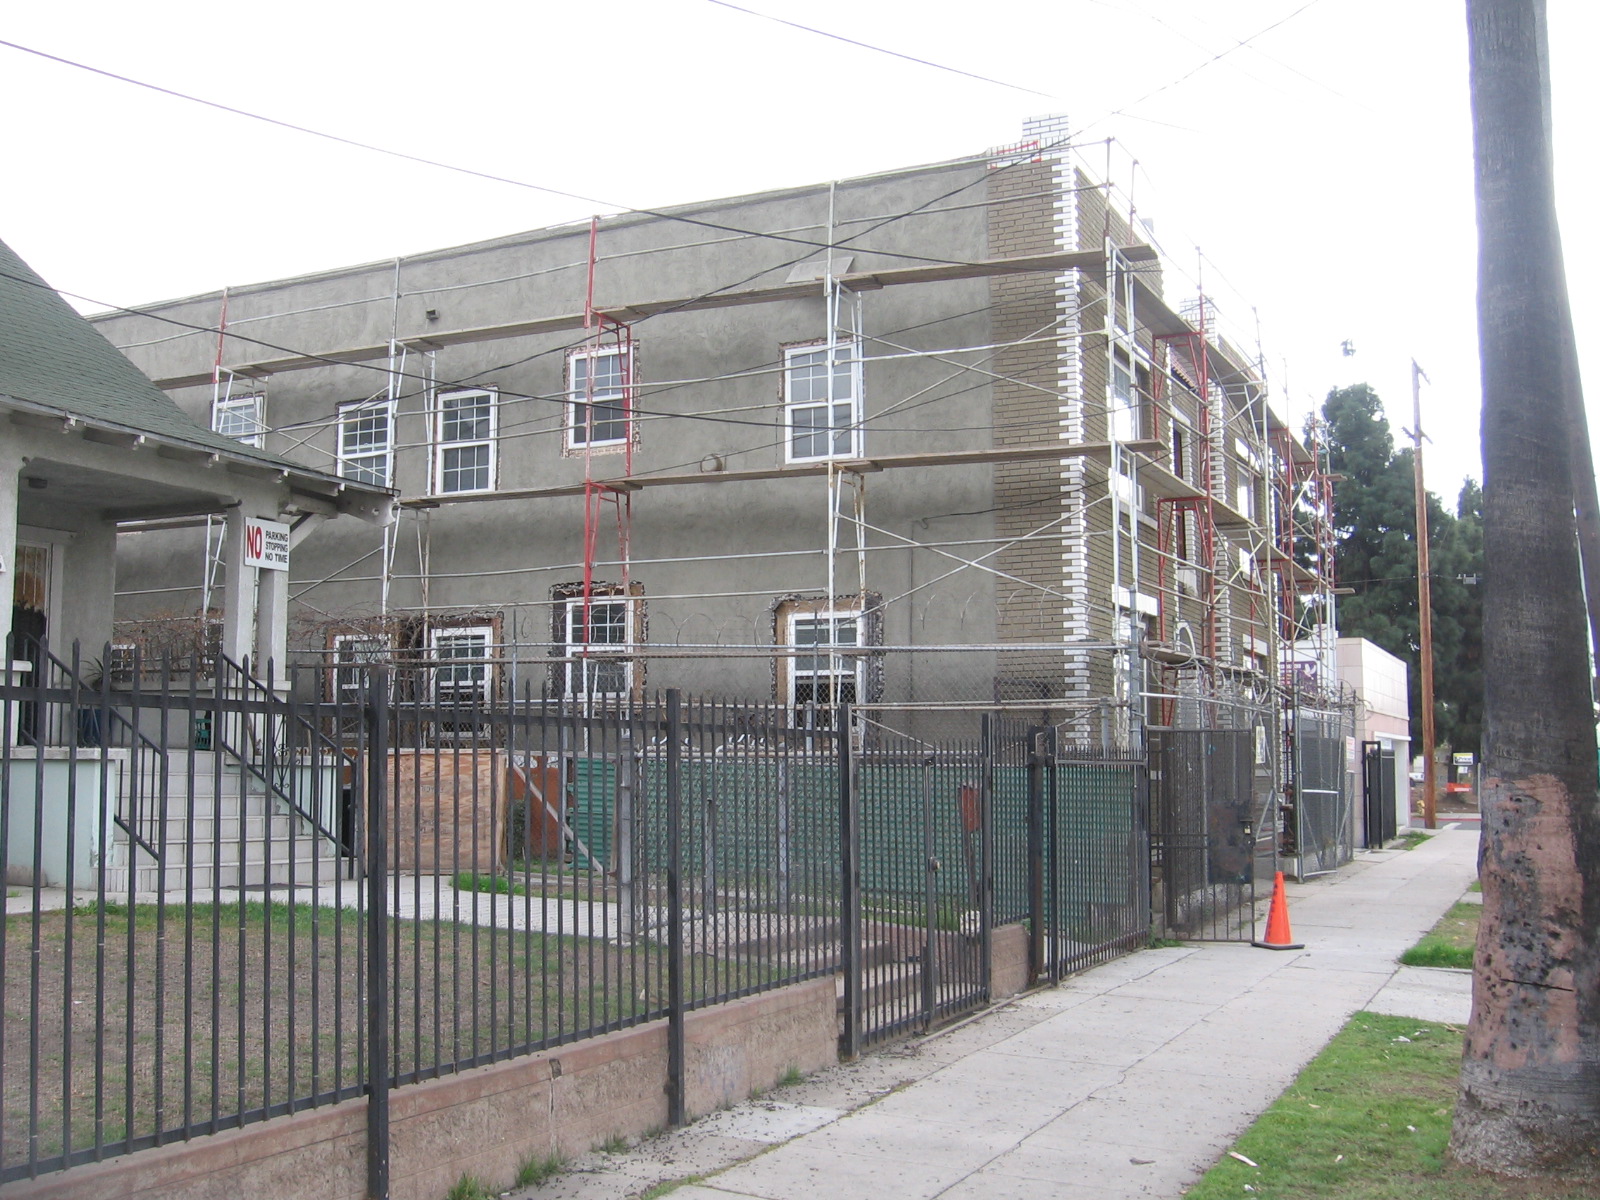 Side view of a two story building under construction